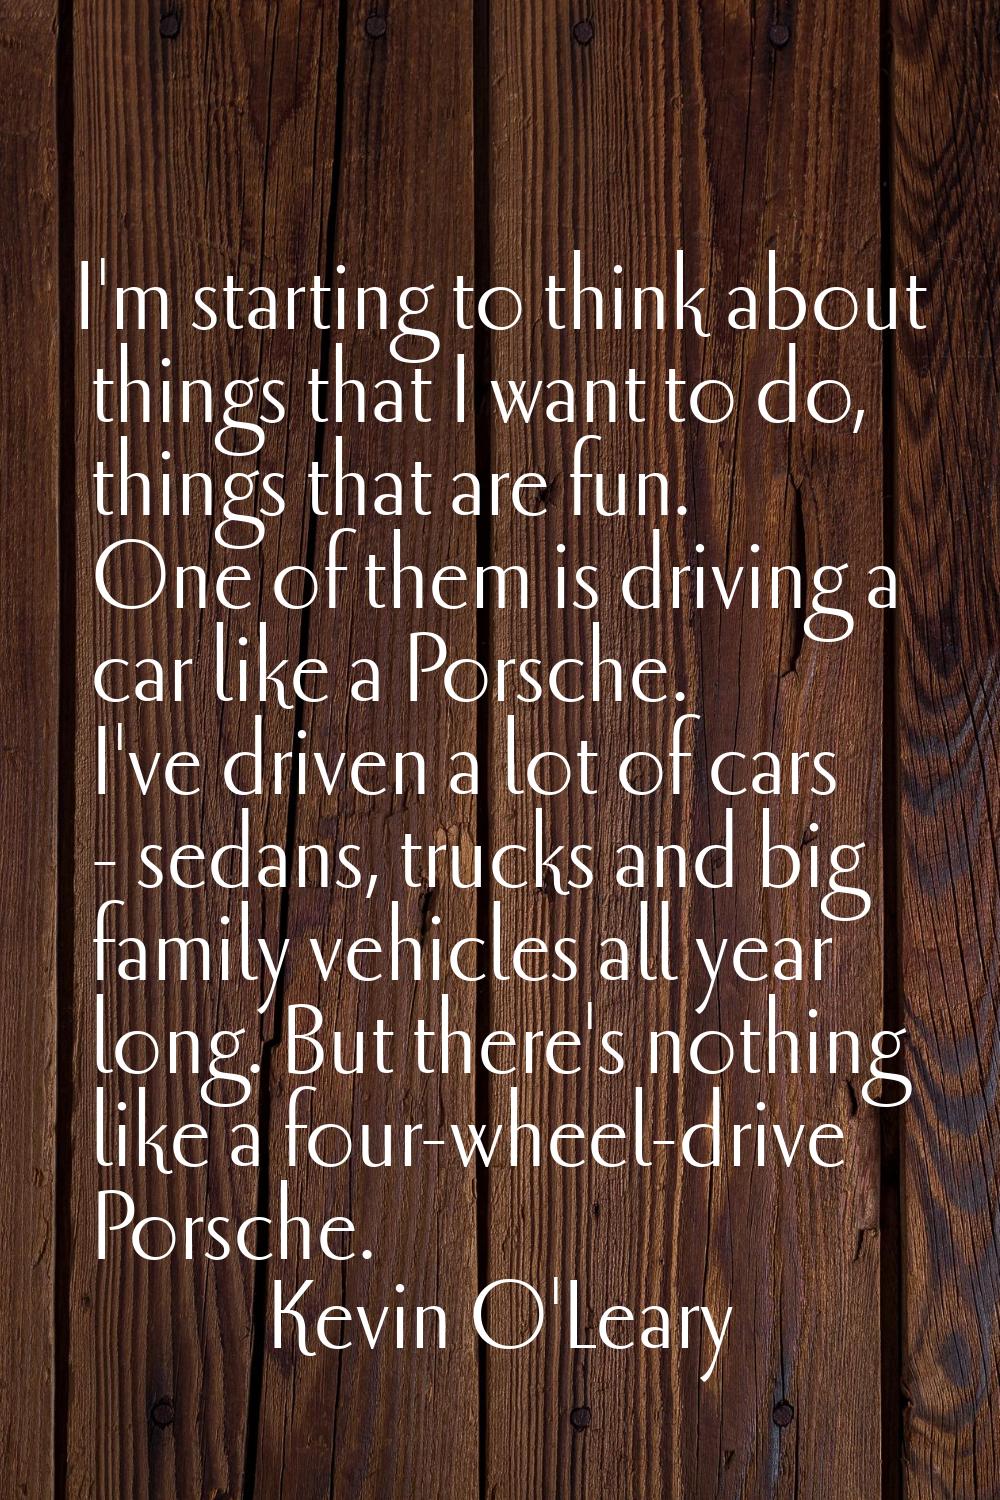 I'm starting to think about things that I want to do, things that are fun. One of them is driving a